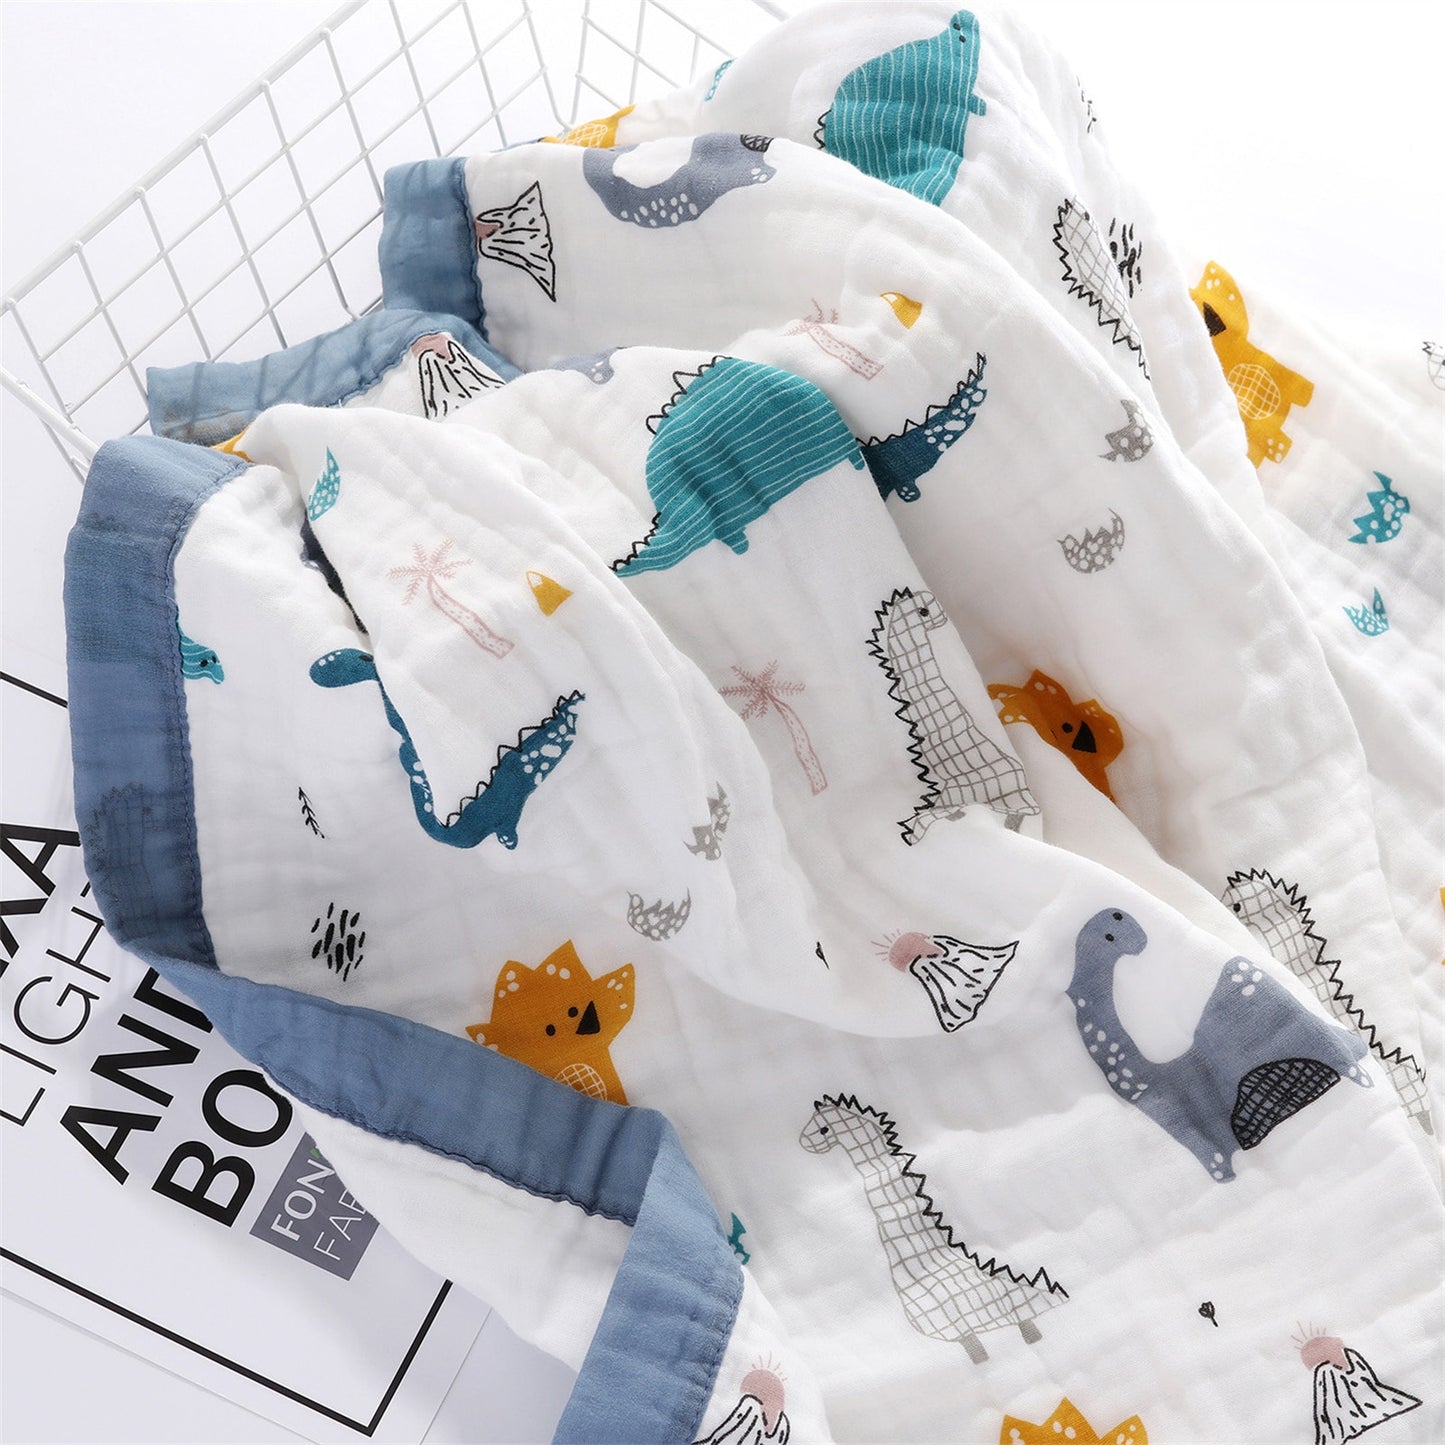 PatPat 100% Cotton Baby Blankets Newborn 6-layer Muslin Cotton Gauze Soft Absorbent Swaddle Blankets Baby for Beds Shower Wipes